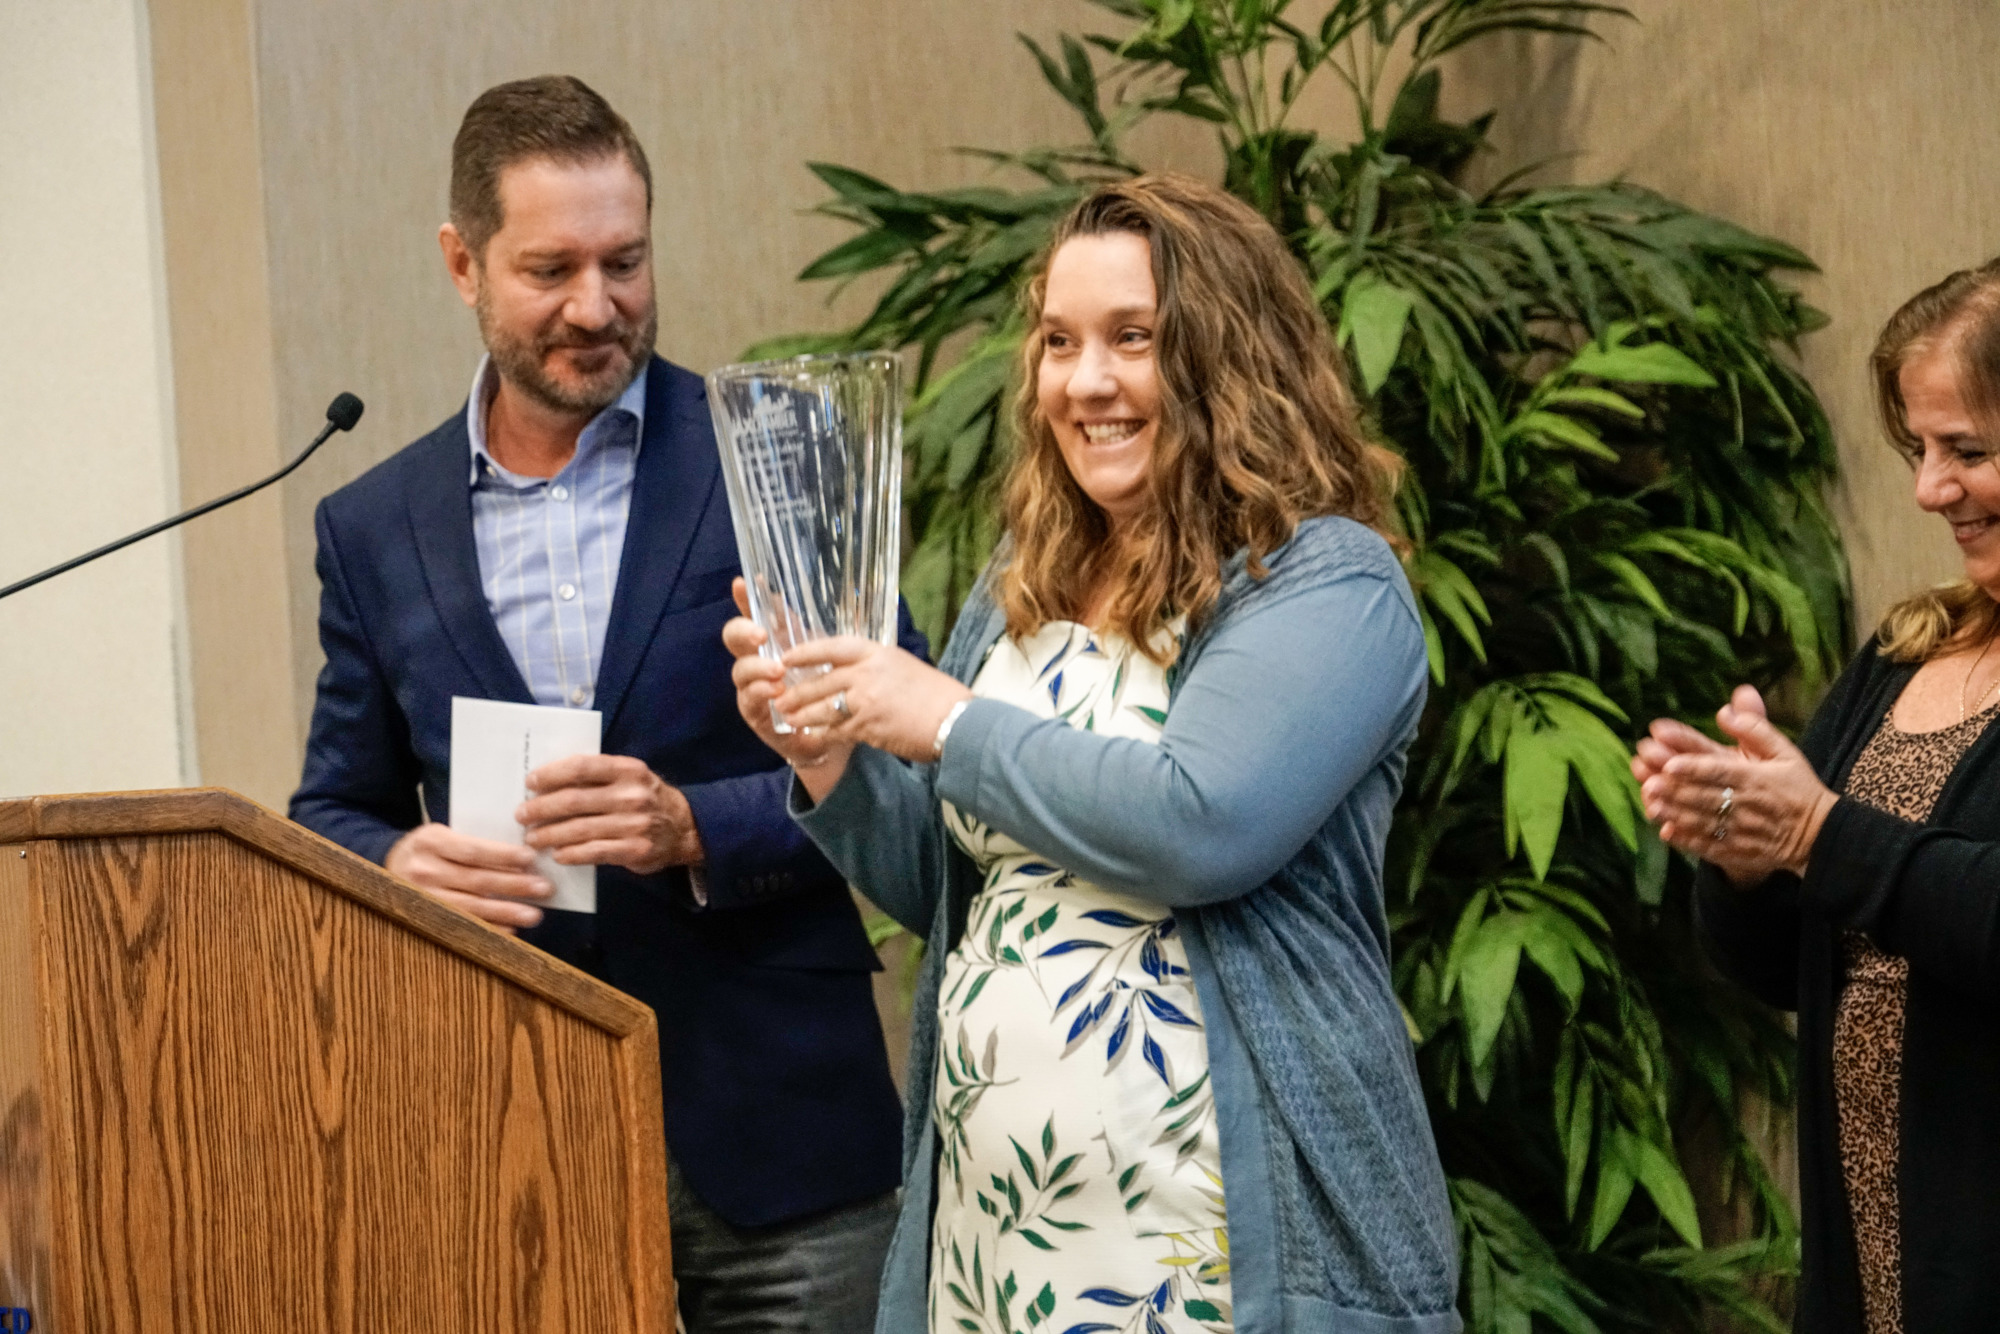 Sláinte Chiropractic owner Bridget Edkin accepts the 2021 JAX Chamber Small Business Leader of the Year award on Feb. 2 from last year’s winner, Martin Coffee Co. owner Ben Johnson.